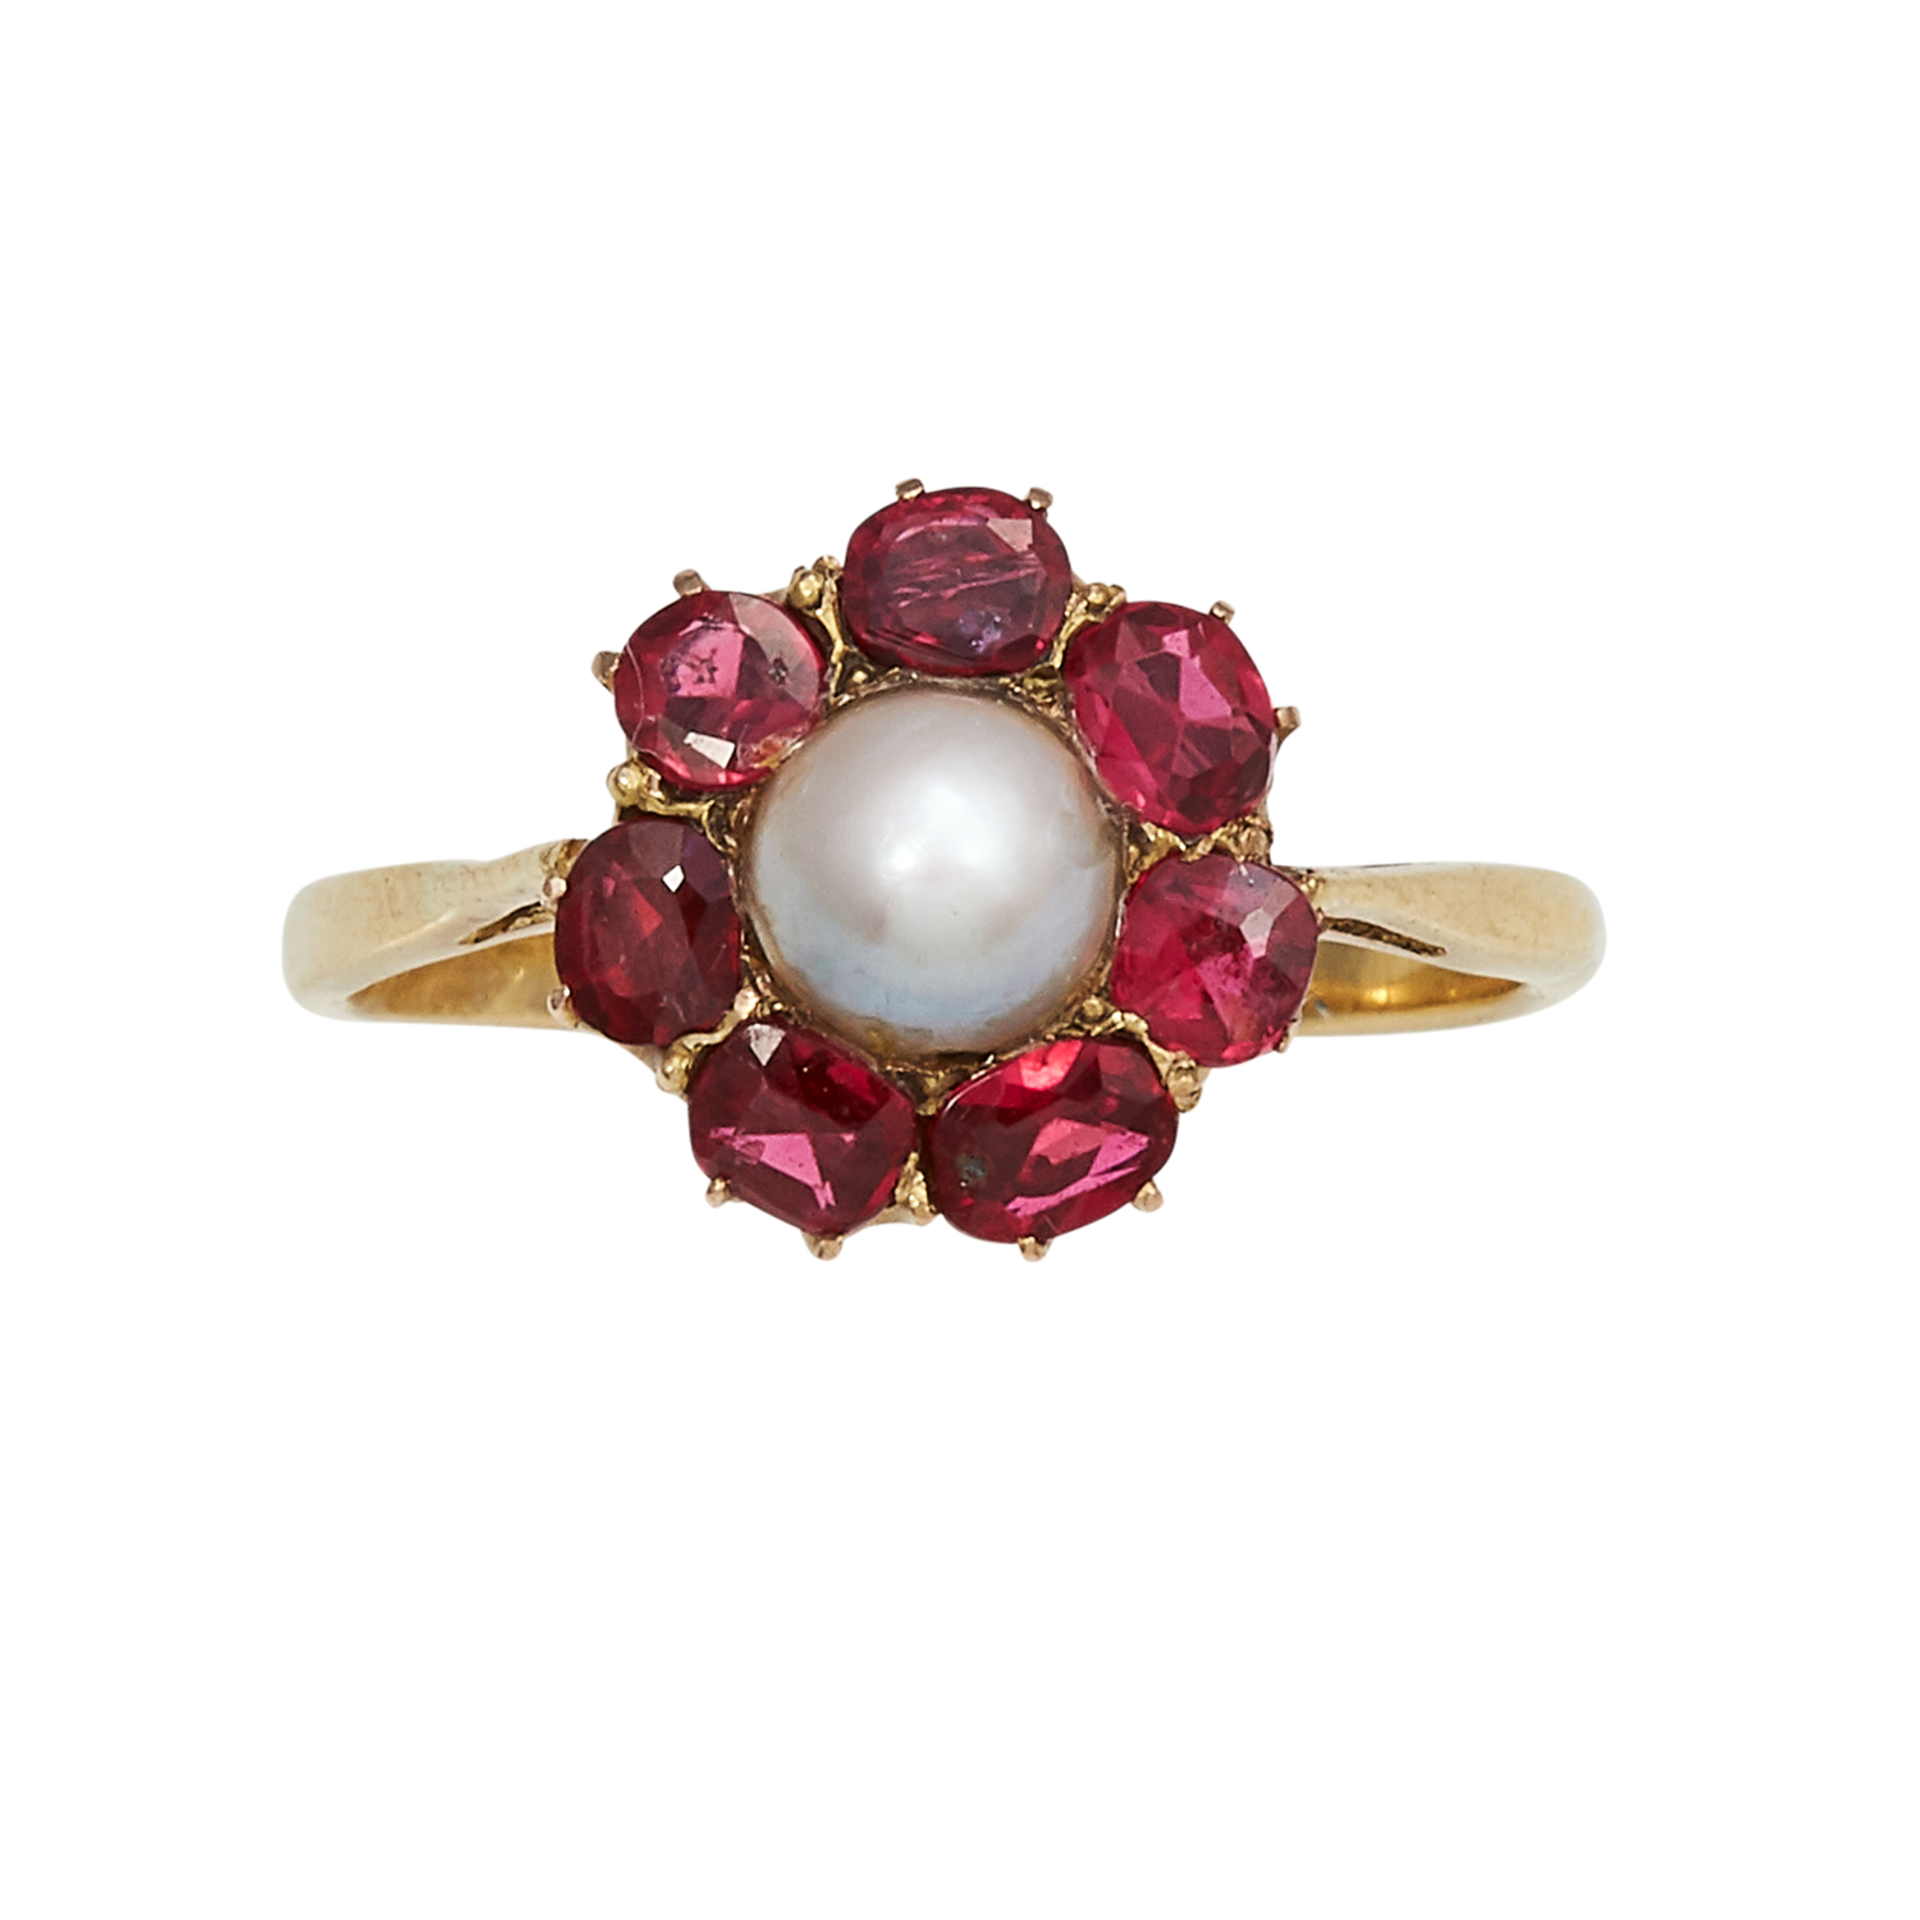 AN ANTIQUE PEARL AND RUBY DRESS RING in high carat yellow gold set with a central pearl of 5.0mm